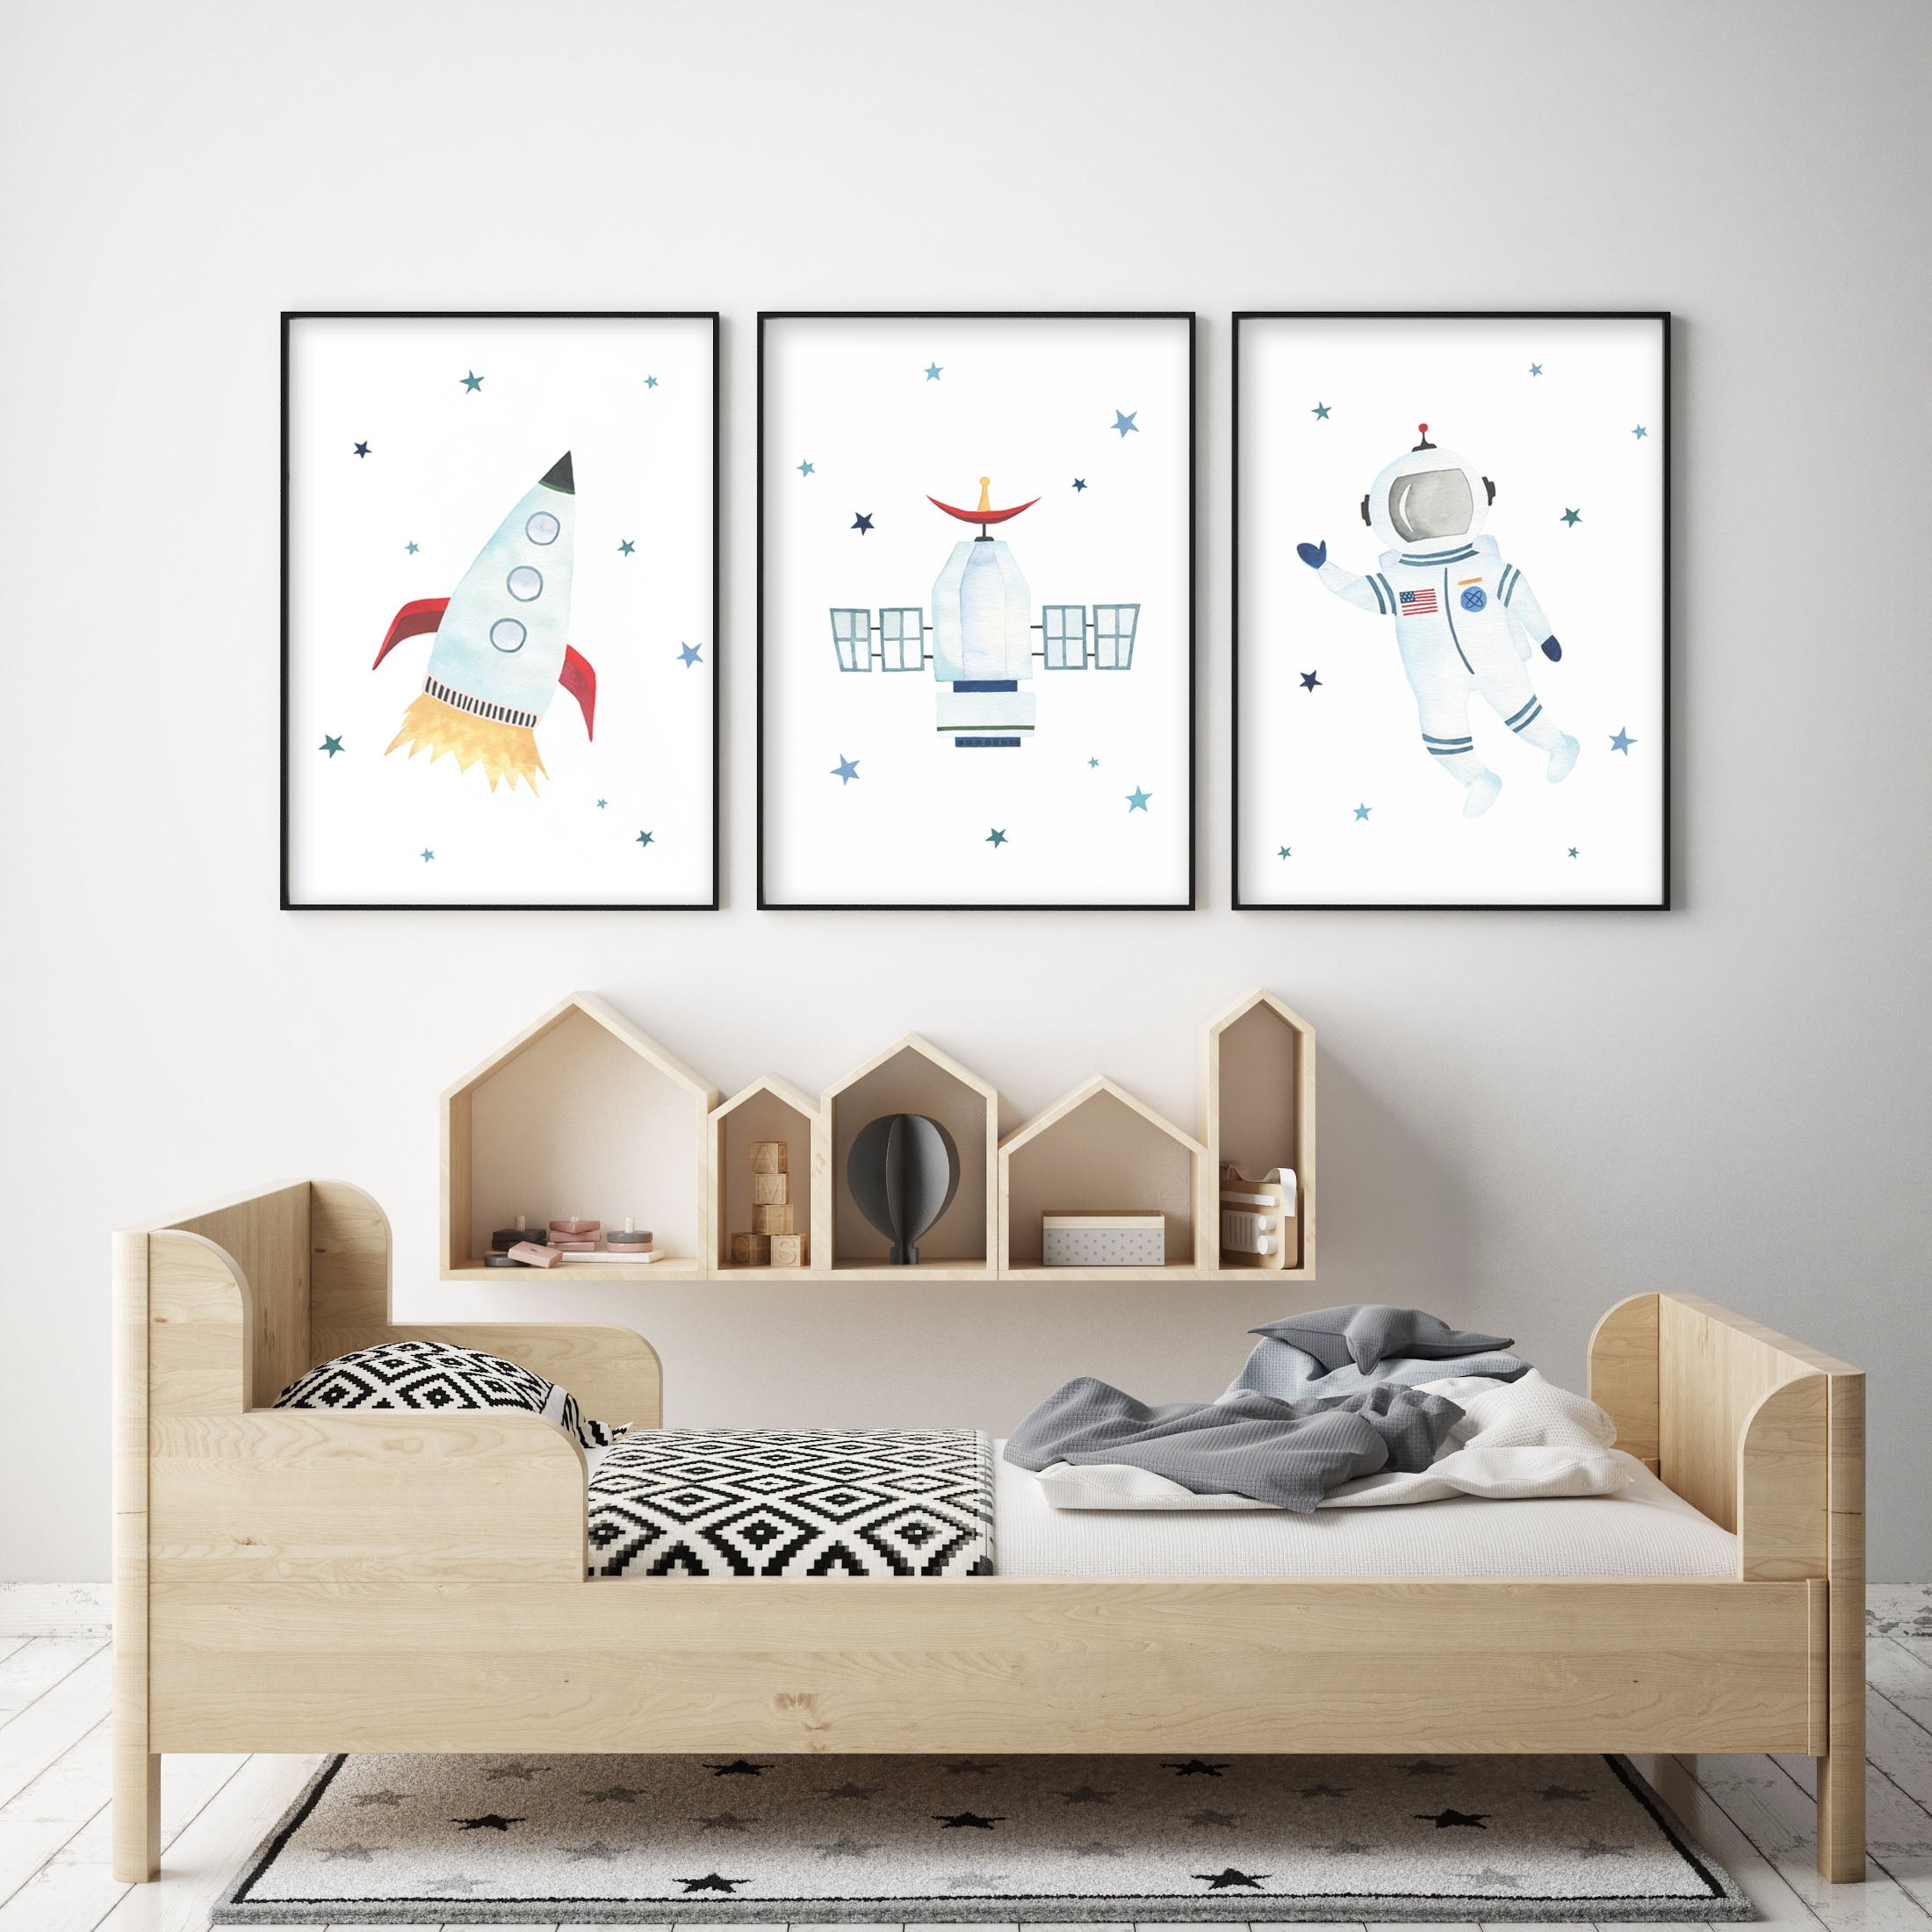 Set of 3 Outer Space Prints - Nursery Wall Art - The Small Art Project - Modern Nursery Prints